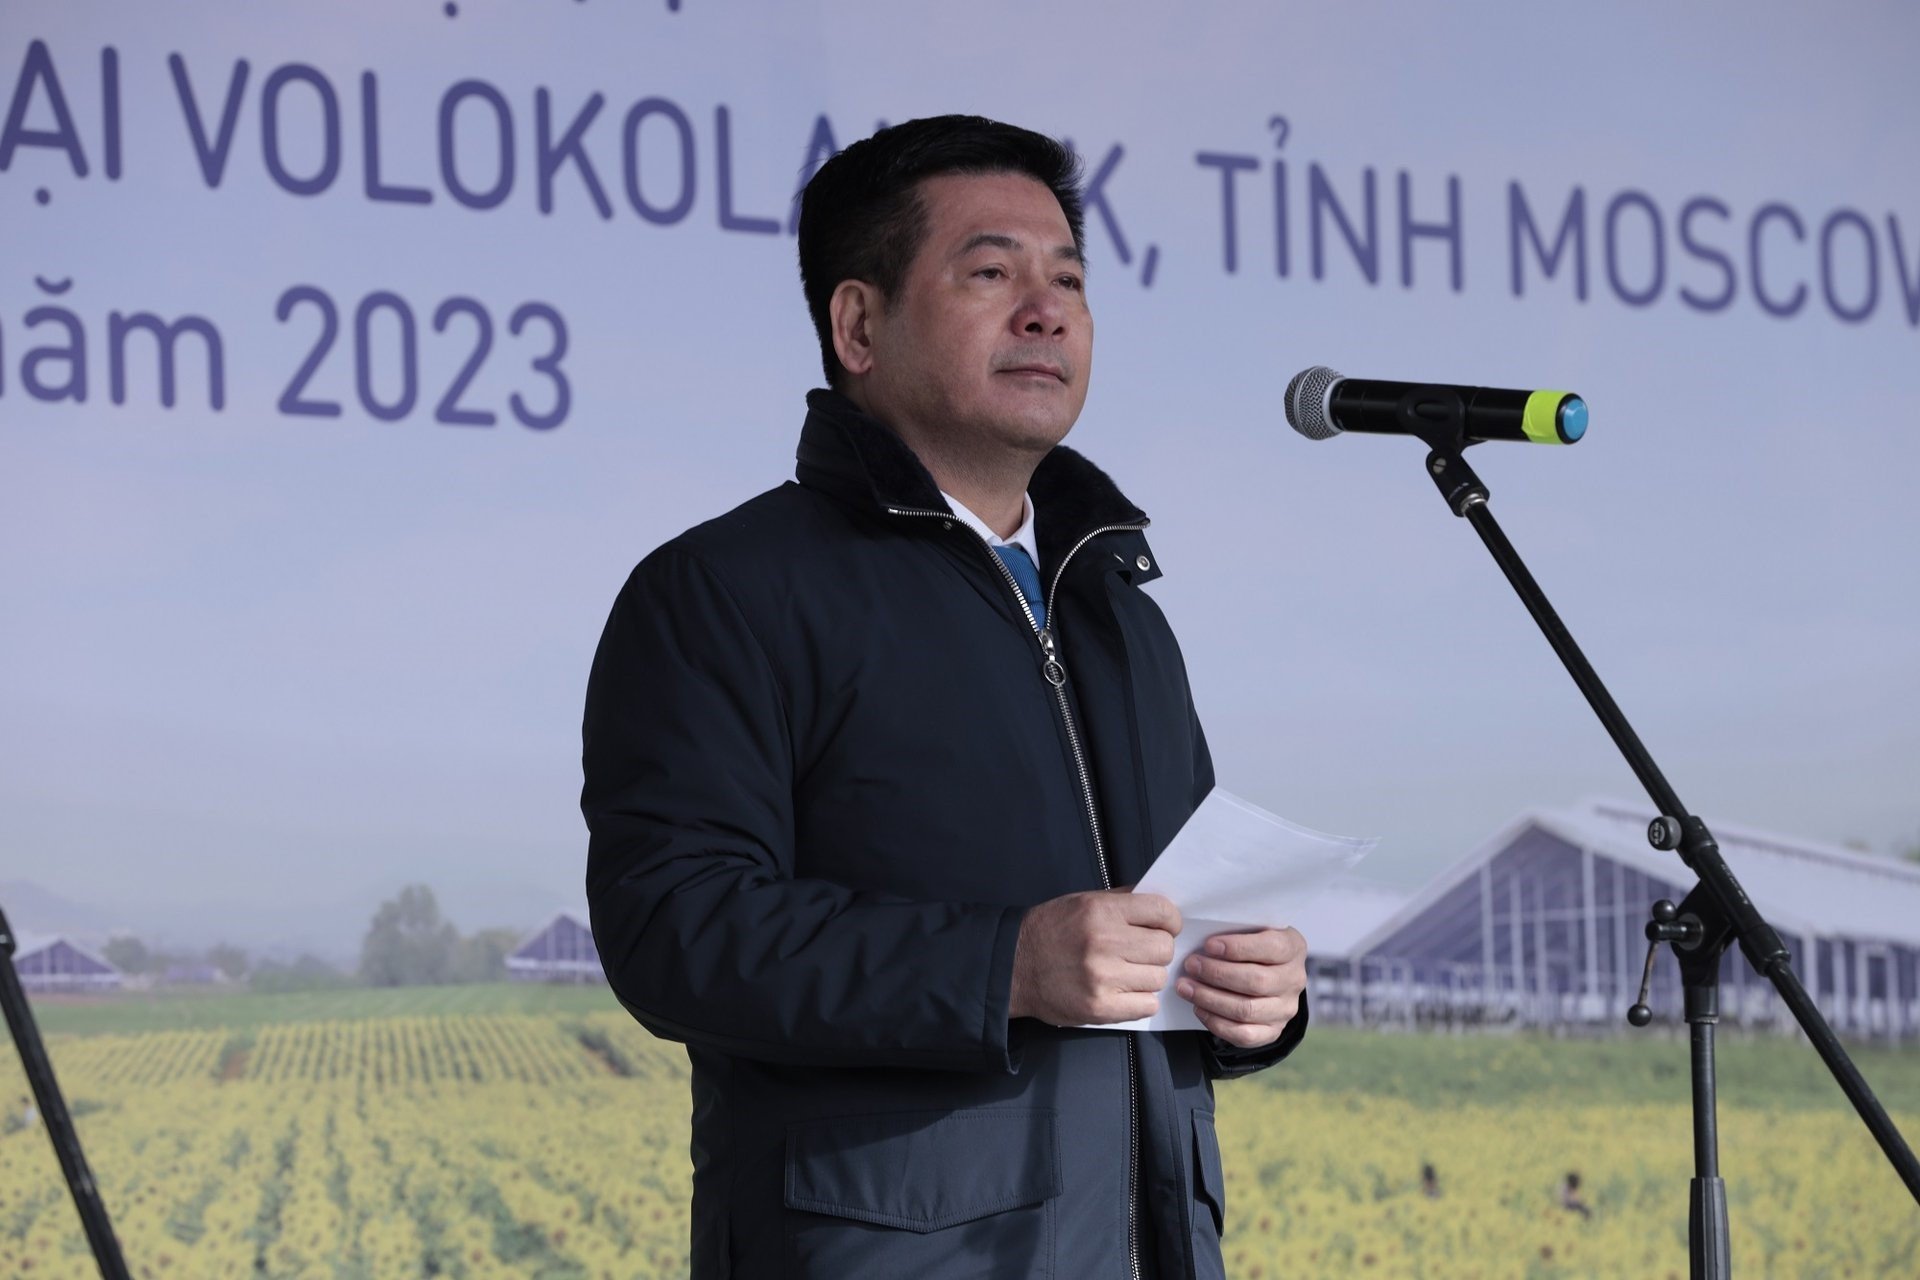 Minister of Industry and Trade Nguyen Hong Dien spoke at the event.